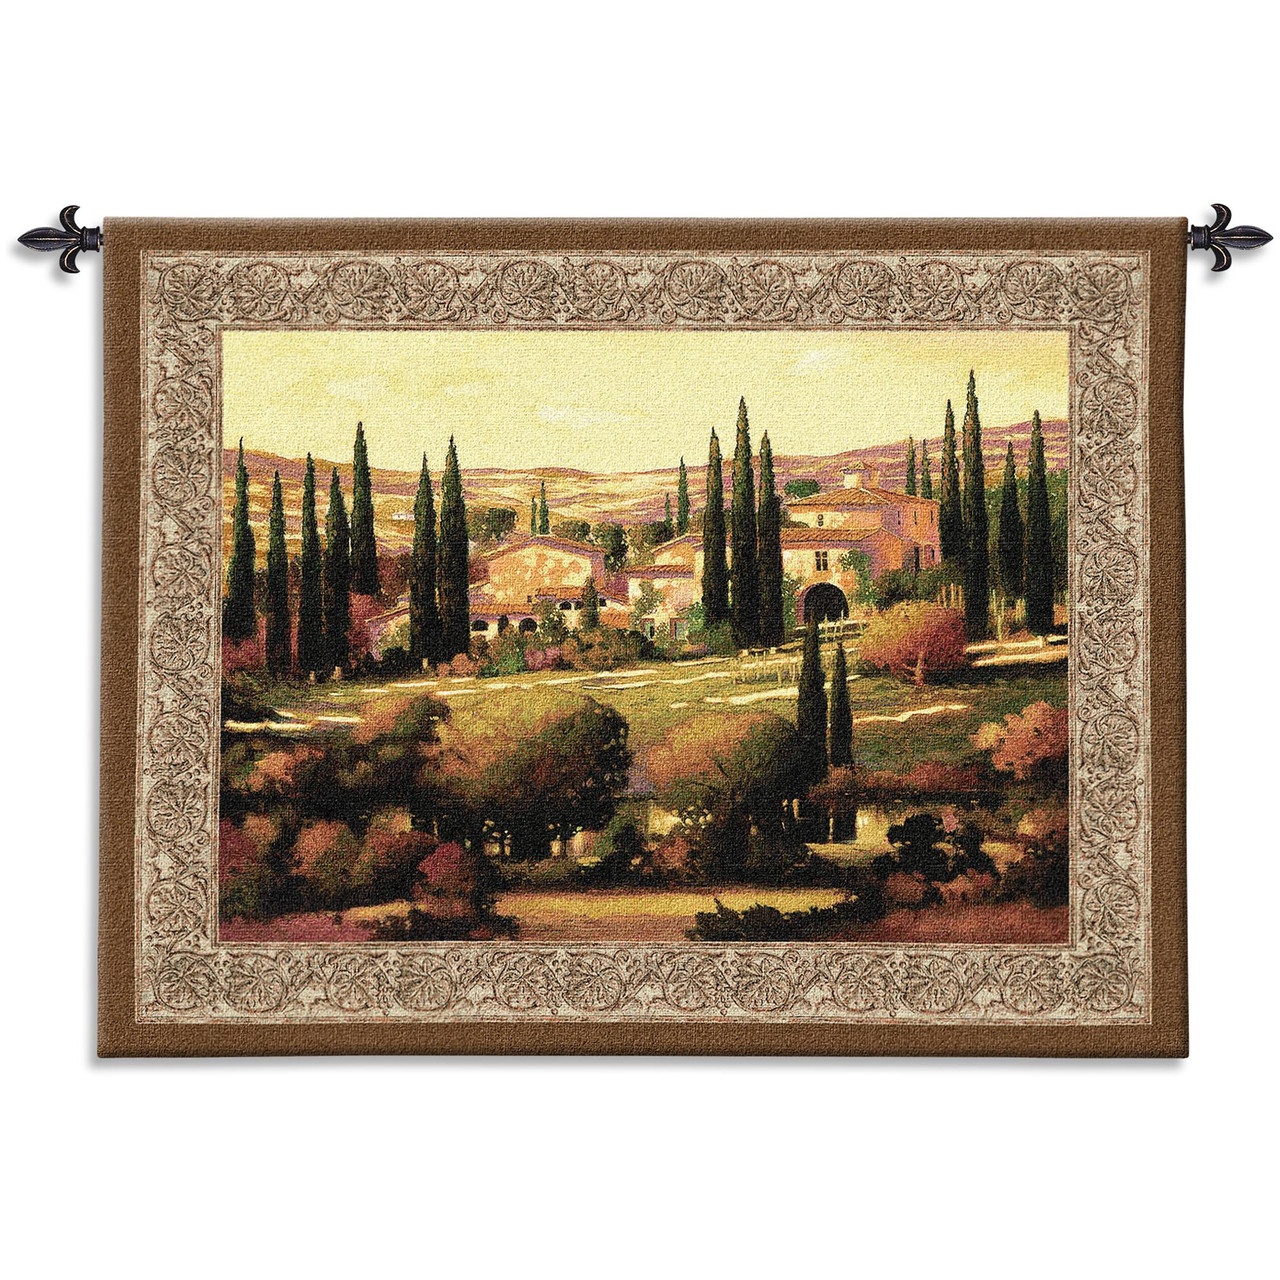 Tuscan Gold by Max Hayslette Woven Tapestry Wall Art Hanging Italian  Villa Countryside Landscape 100% Cotton USA Size 53x40